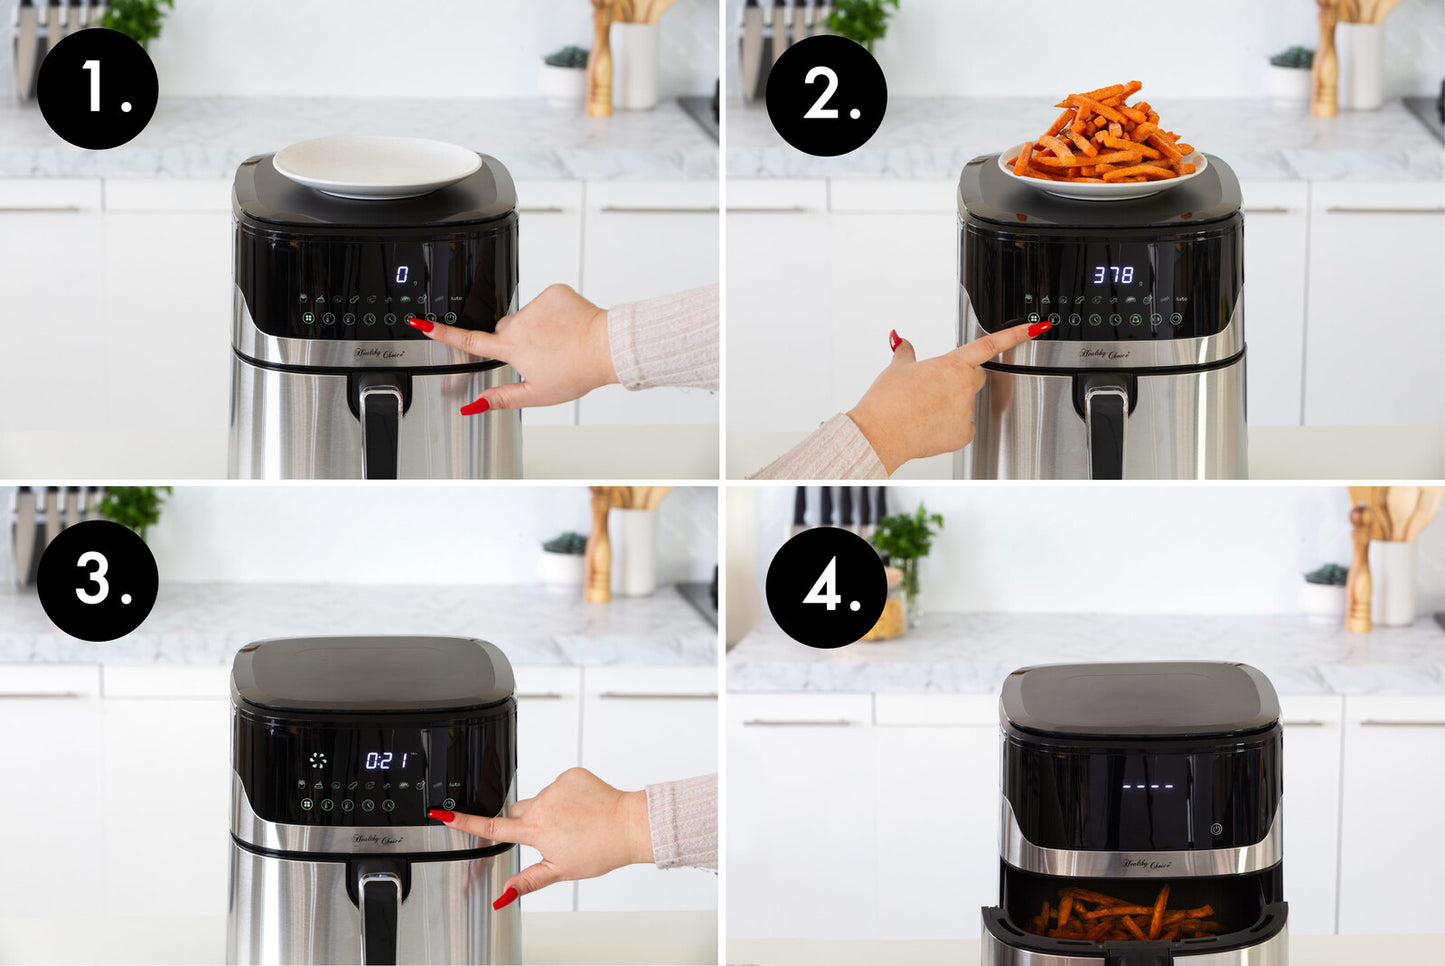 7L Air Fryer Wiz with Built-In Scale and 9 Cooking Programs